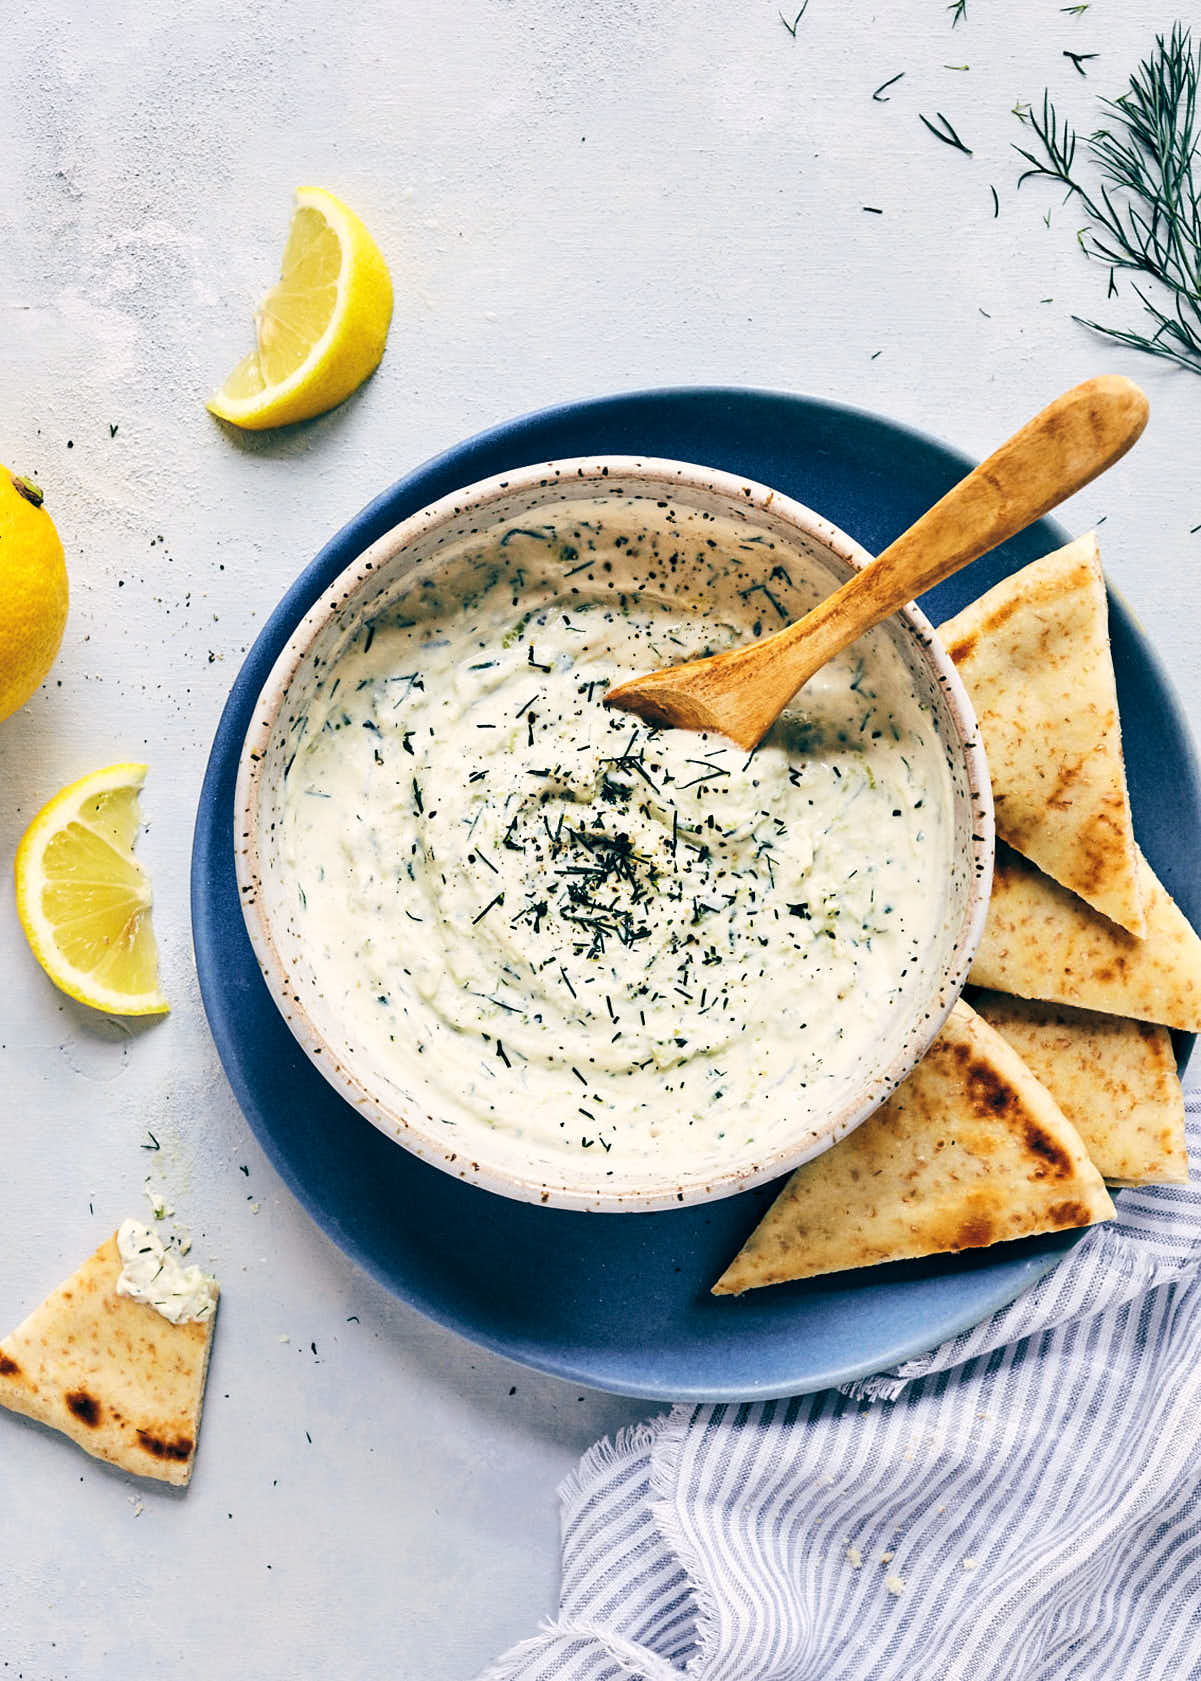 Bowl of vegan tzatziki with bread for dipping